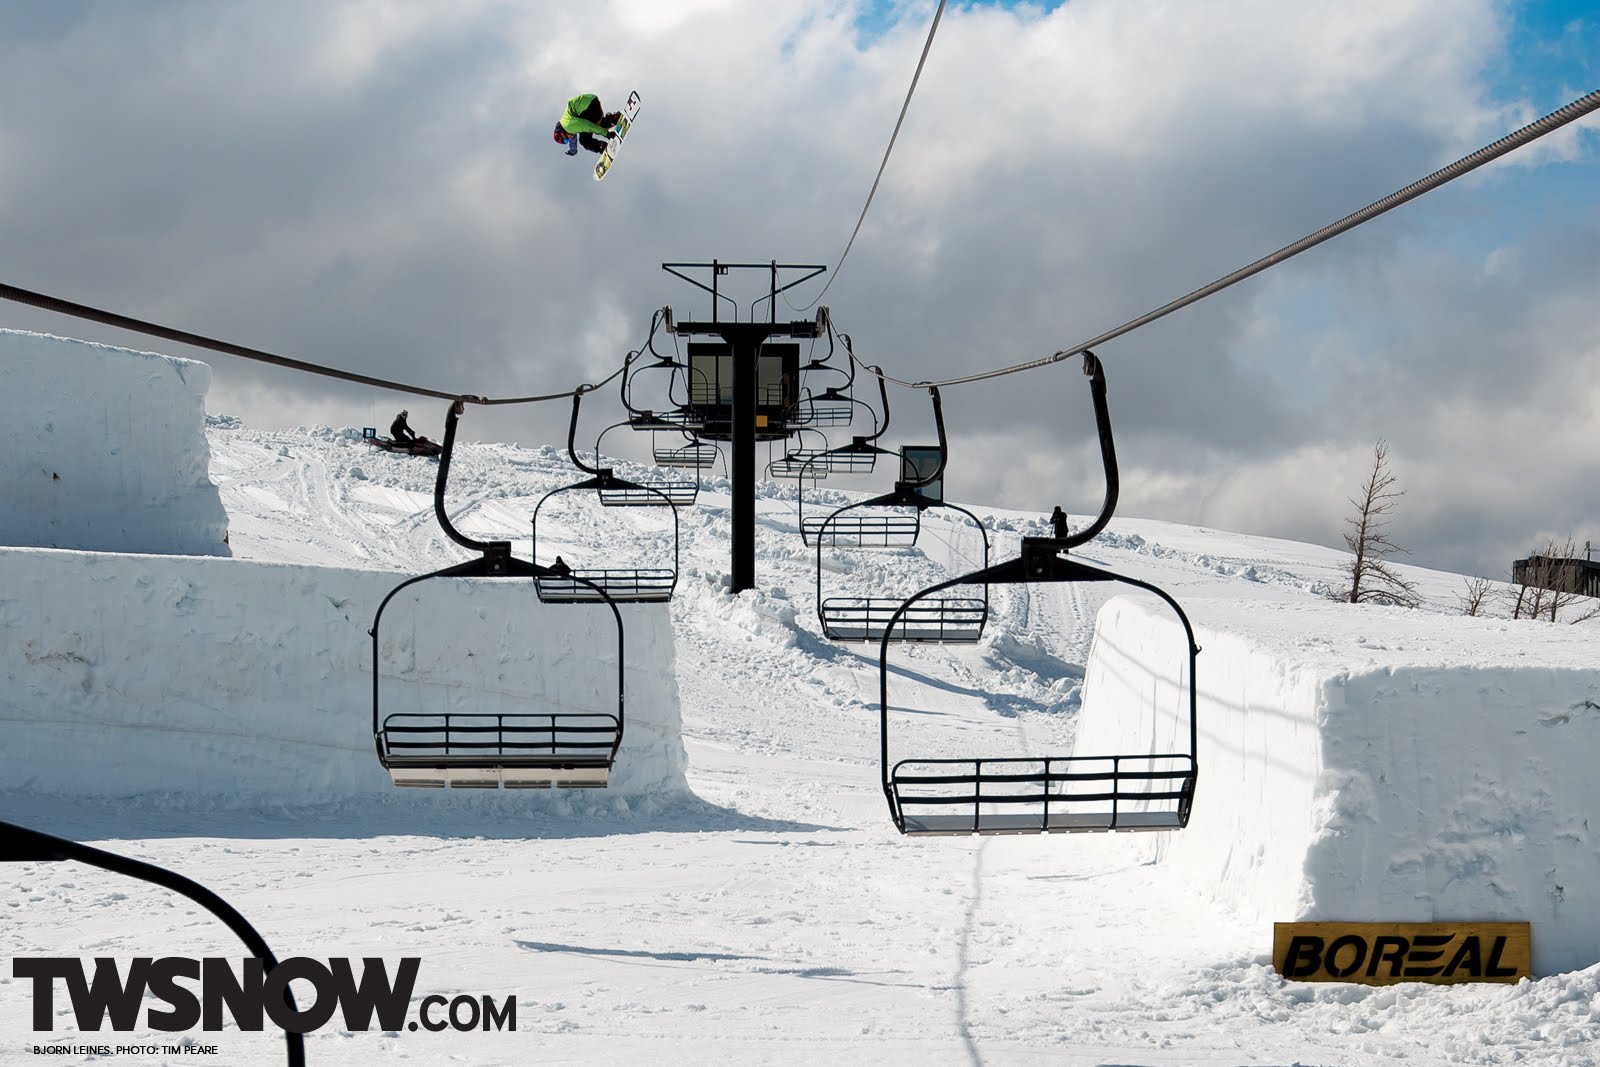 Transworld Snowboarding The One And Only